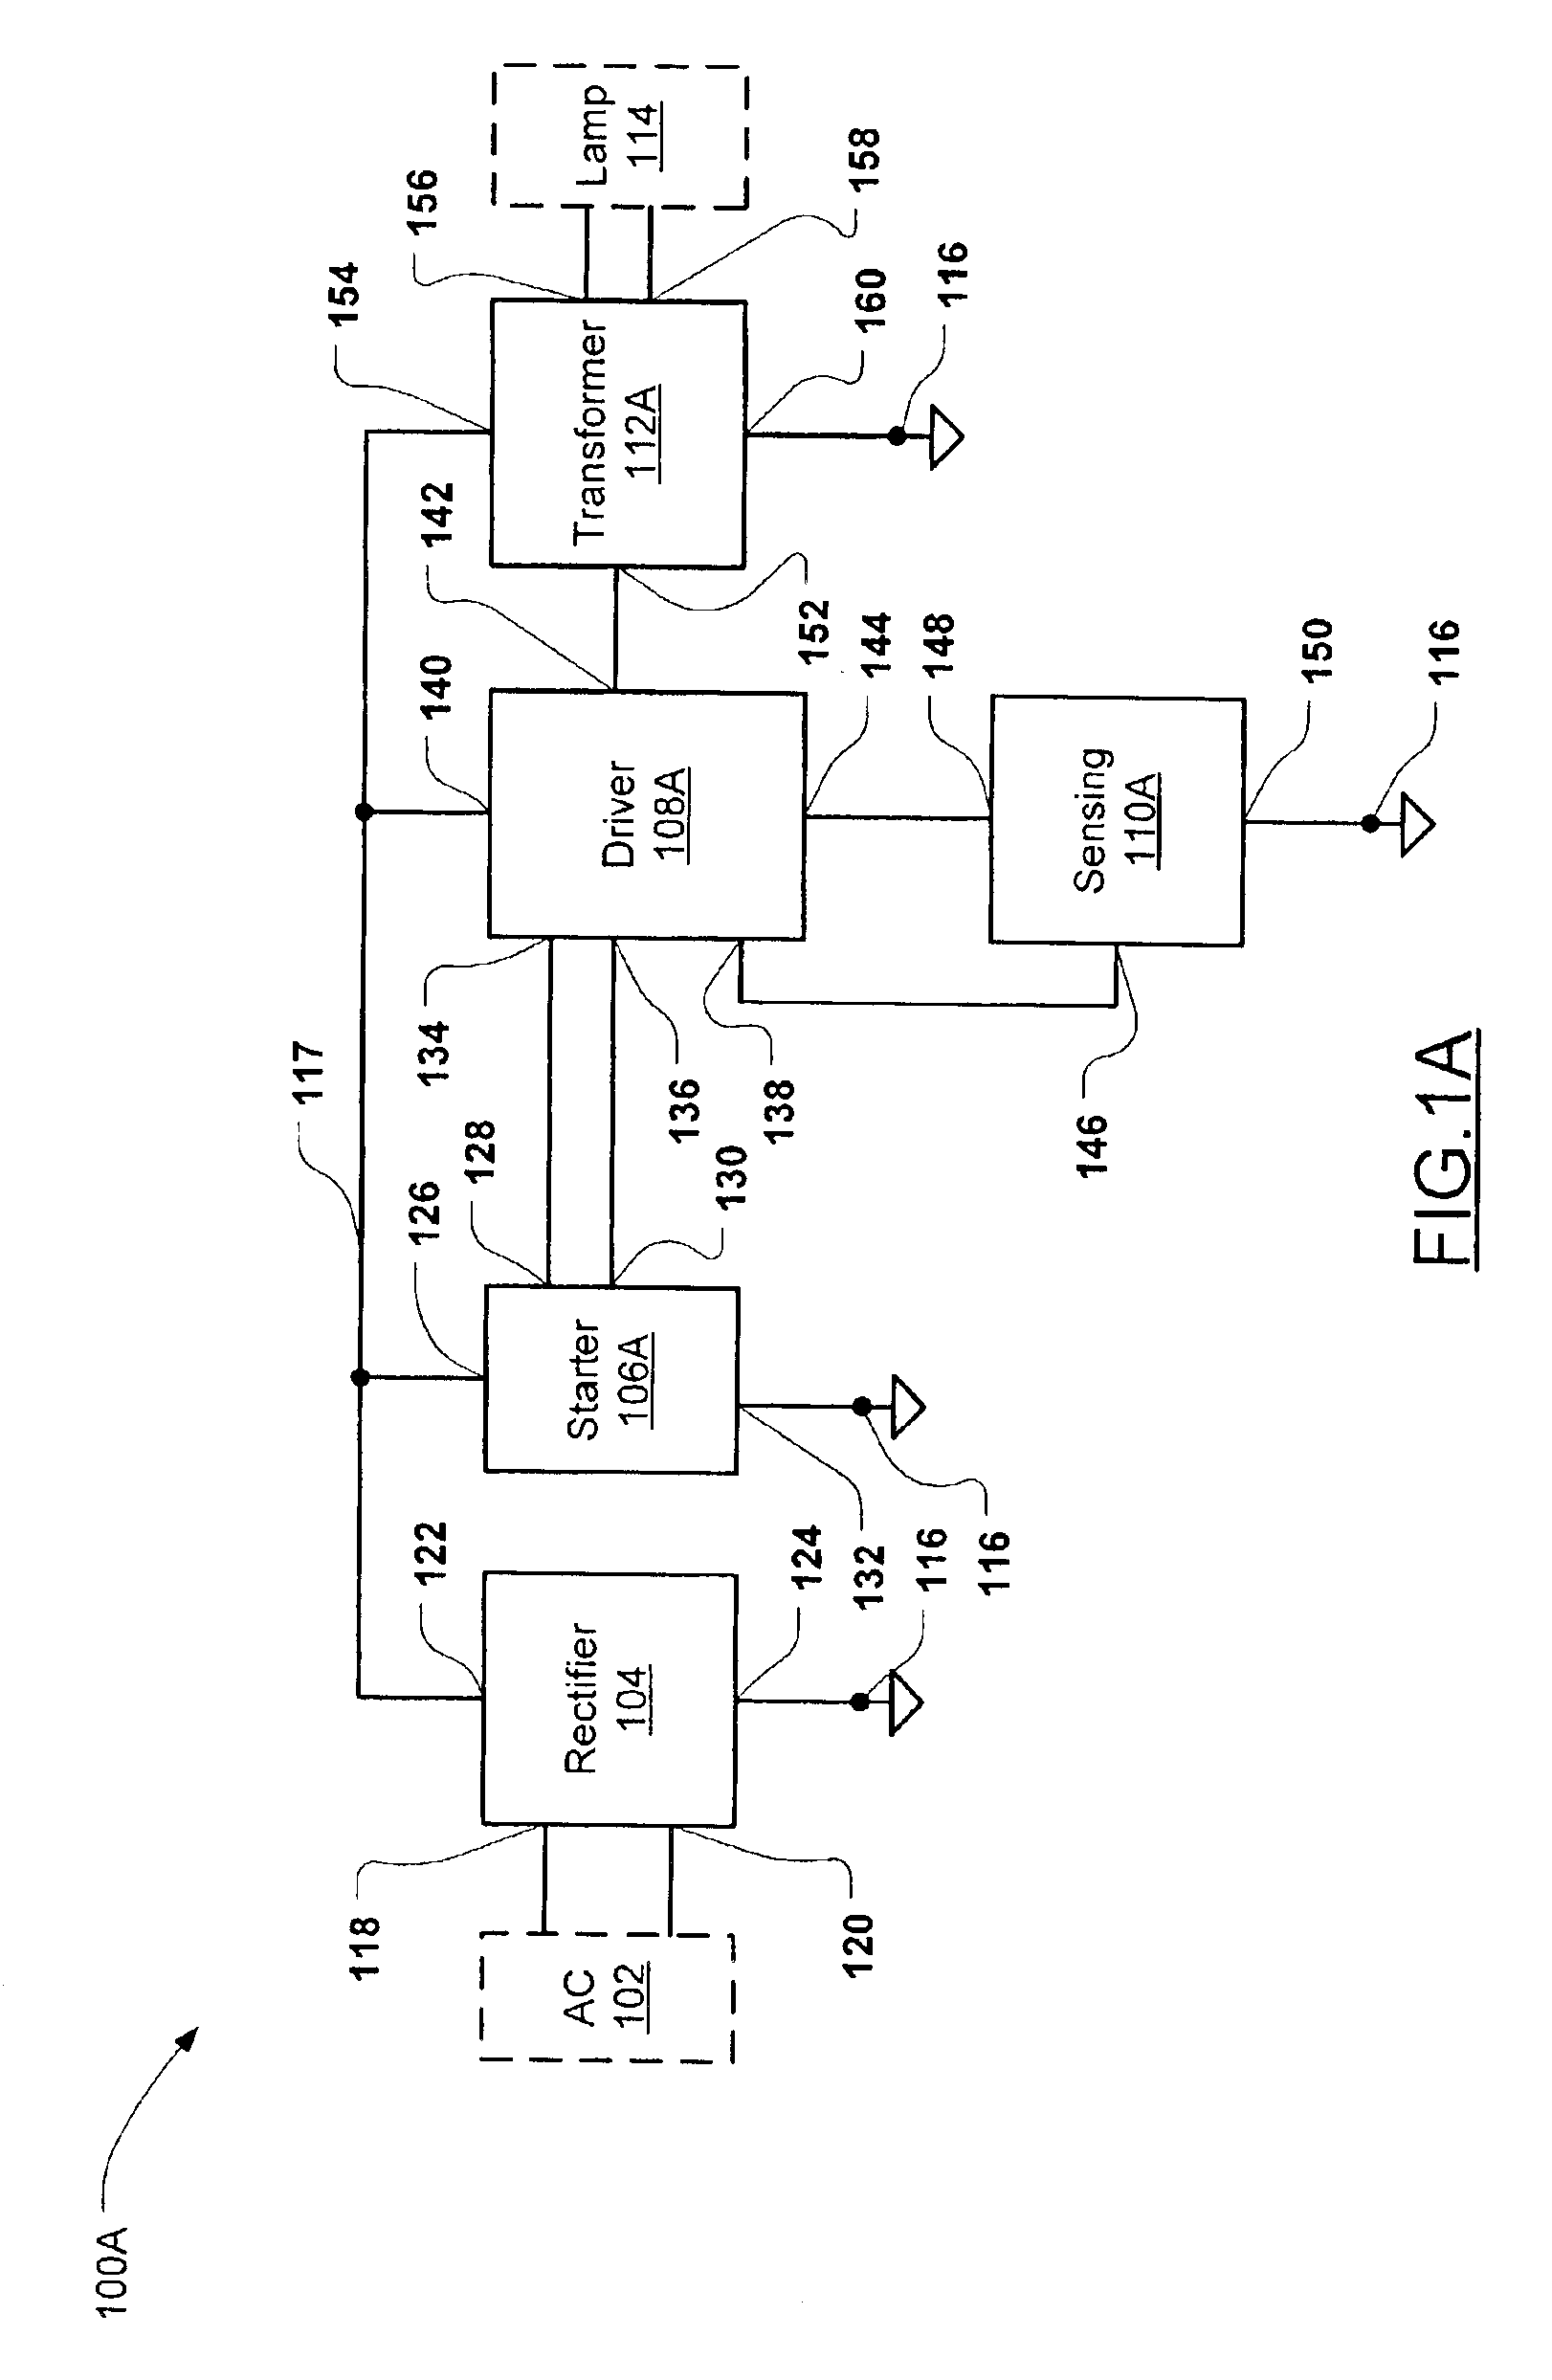 Converter for converting an AC power main voltage to a voltage suitable for driving a lamp